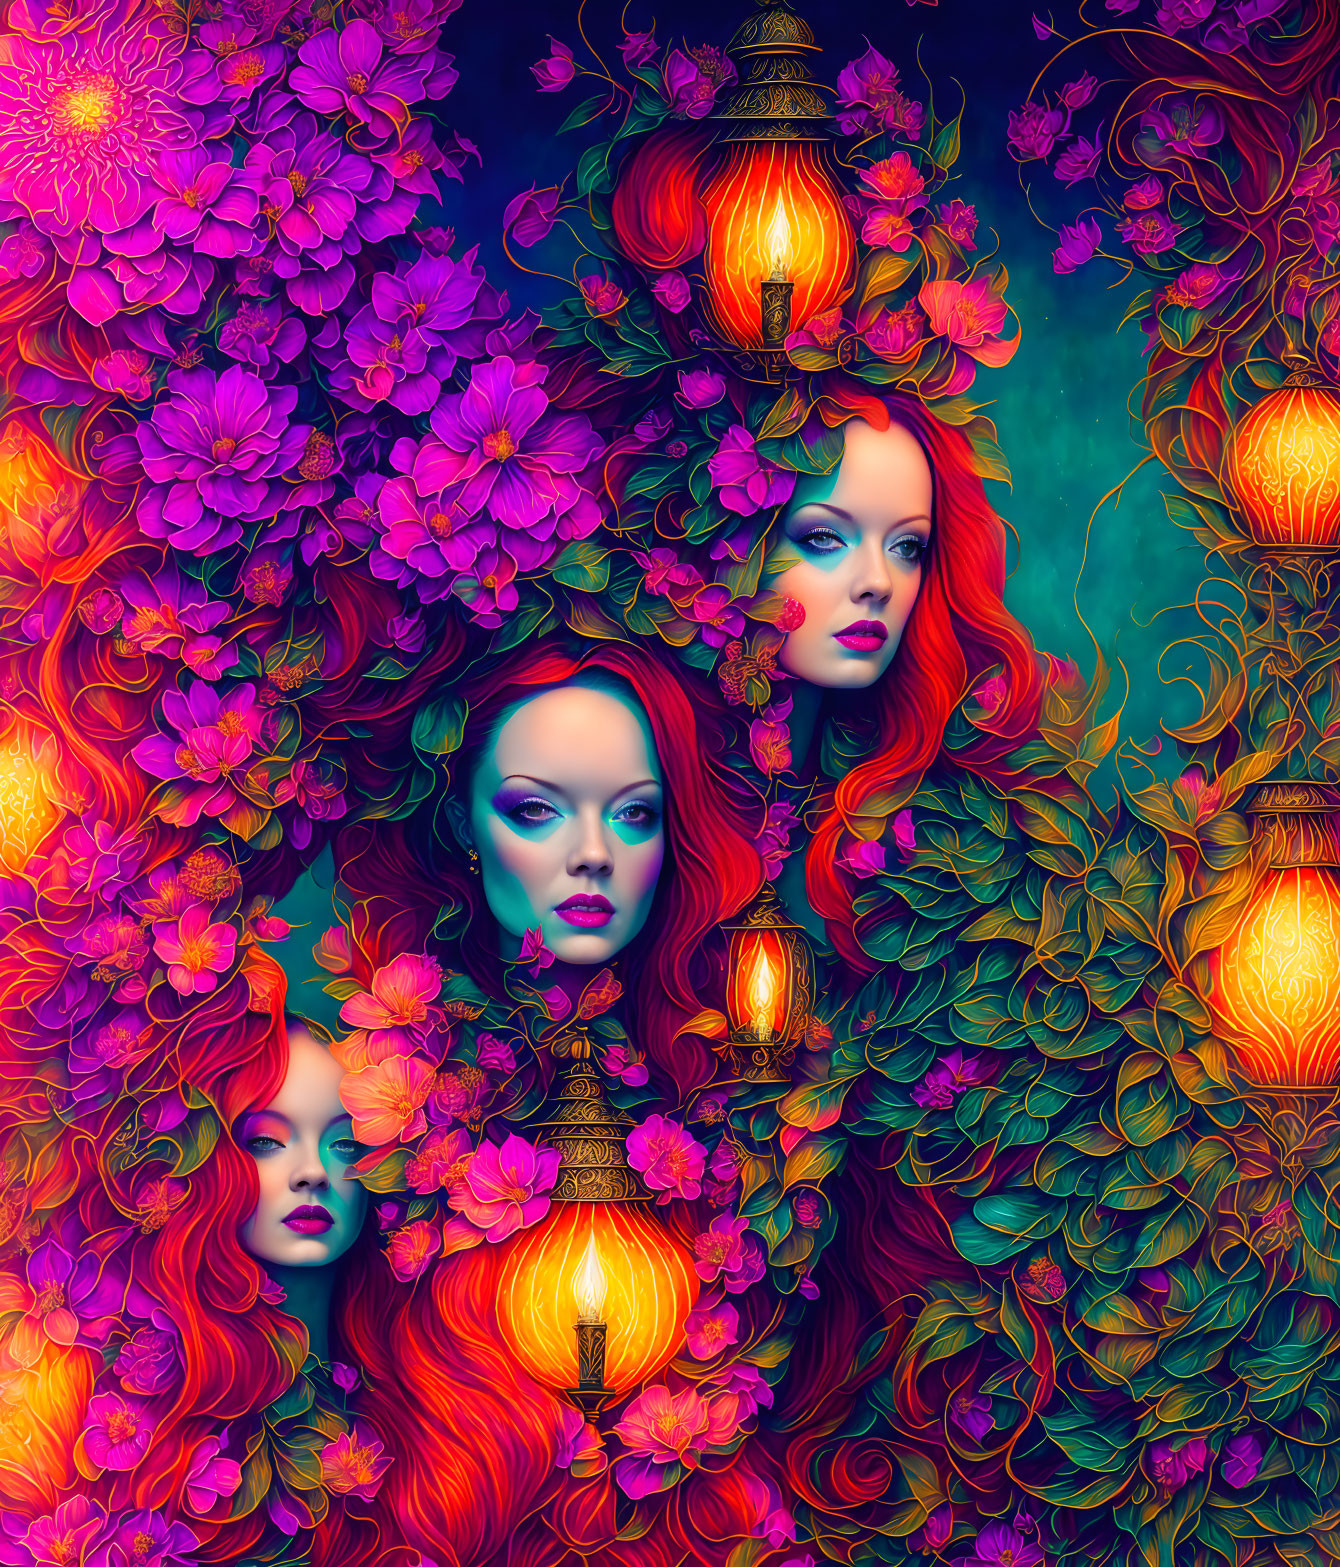 Vibrant illustration: Three red-haired women in mystical setting.